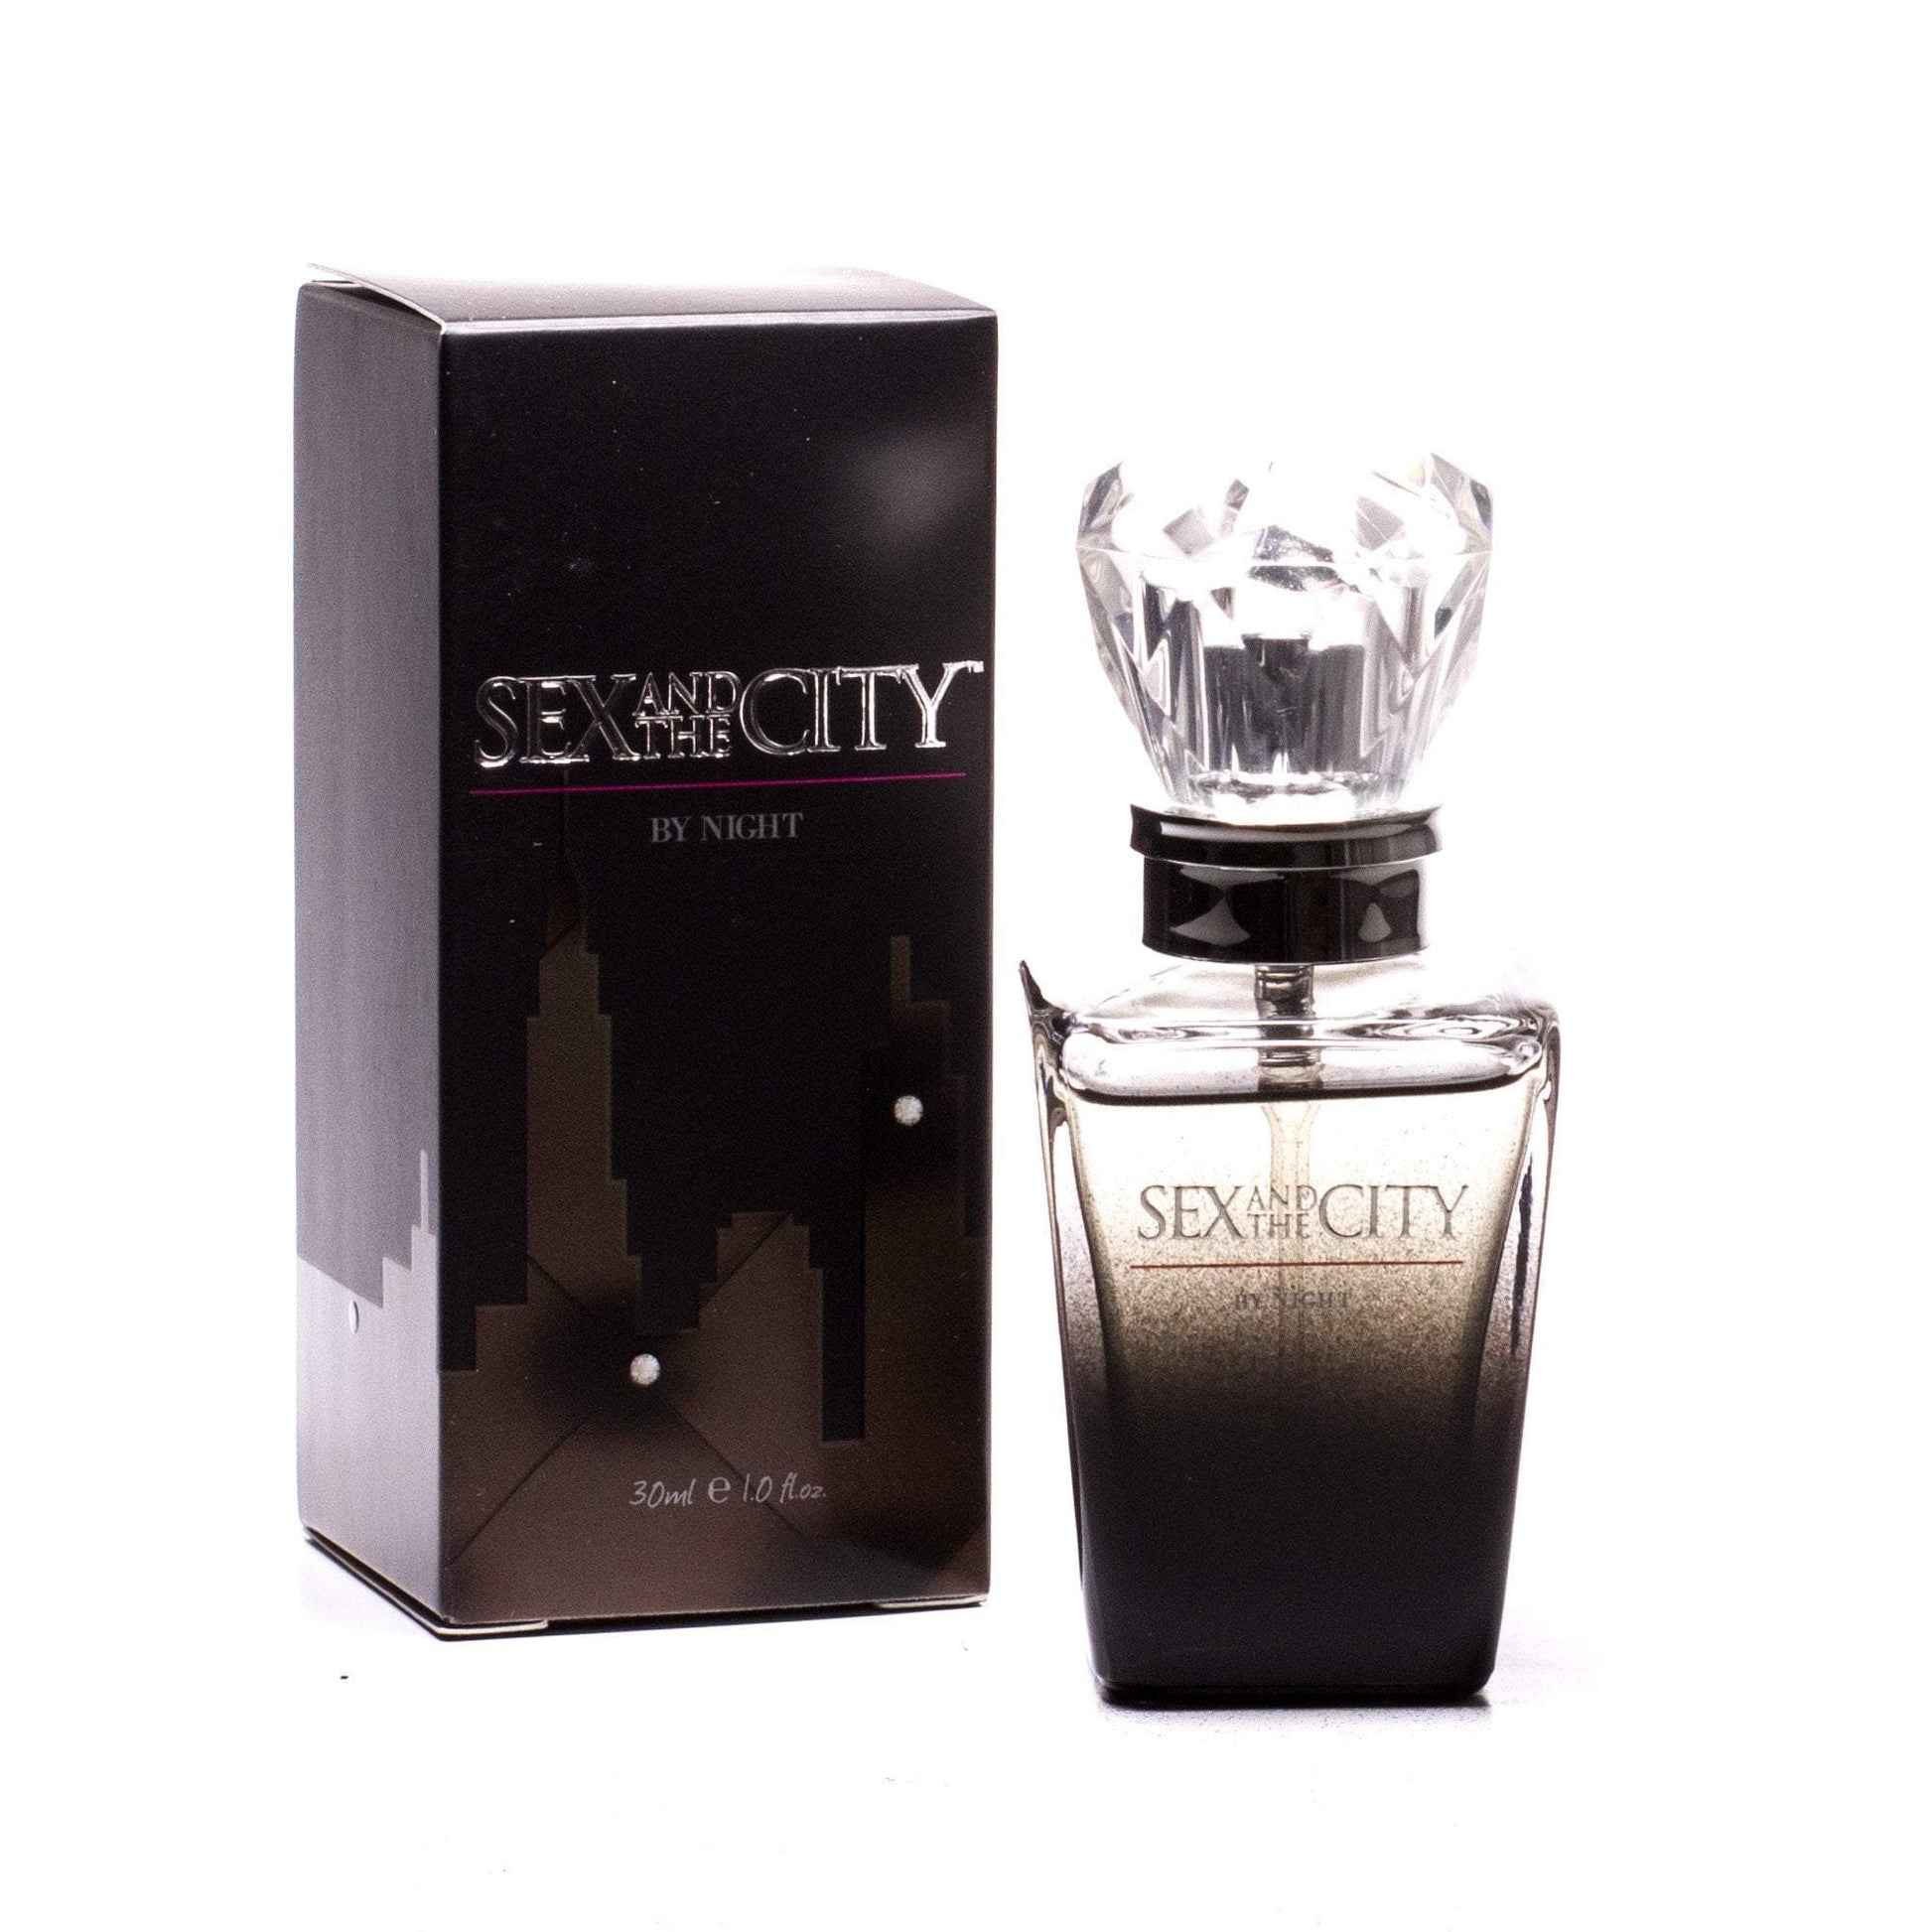 Sex in the City by Night Eau de Parfum Spray for Women, Product image 1